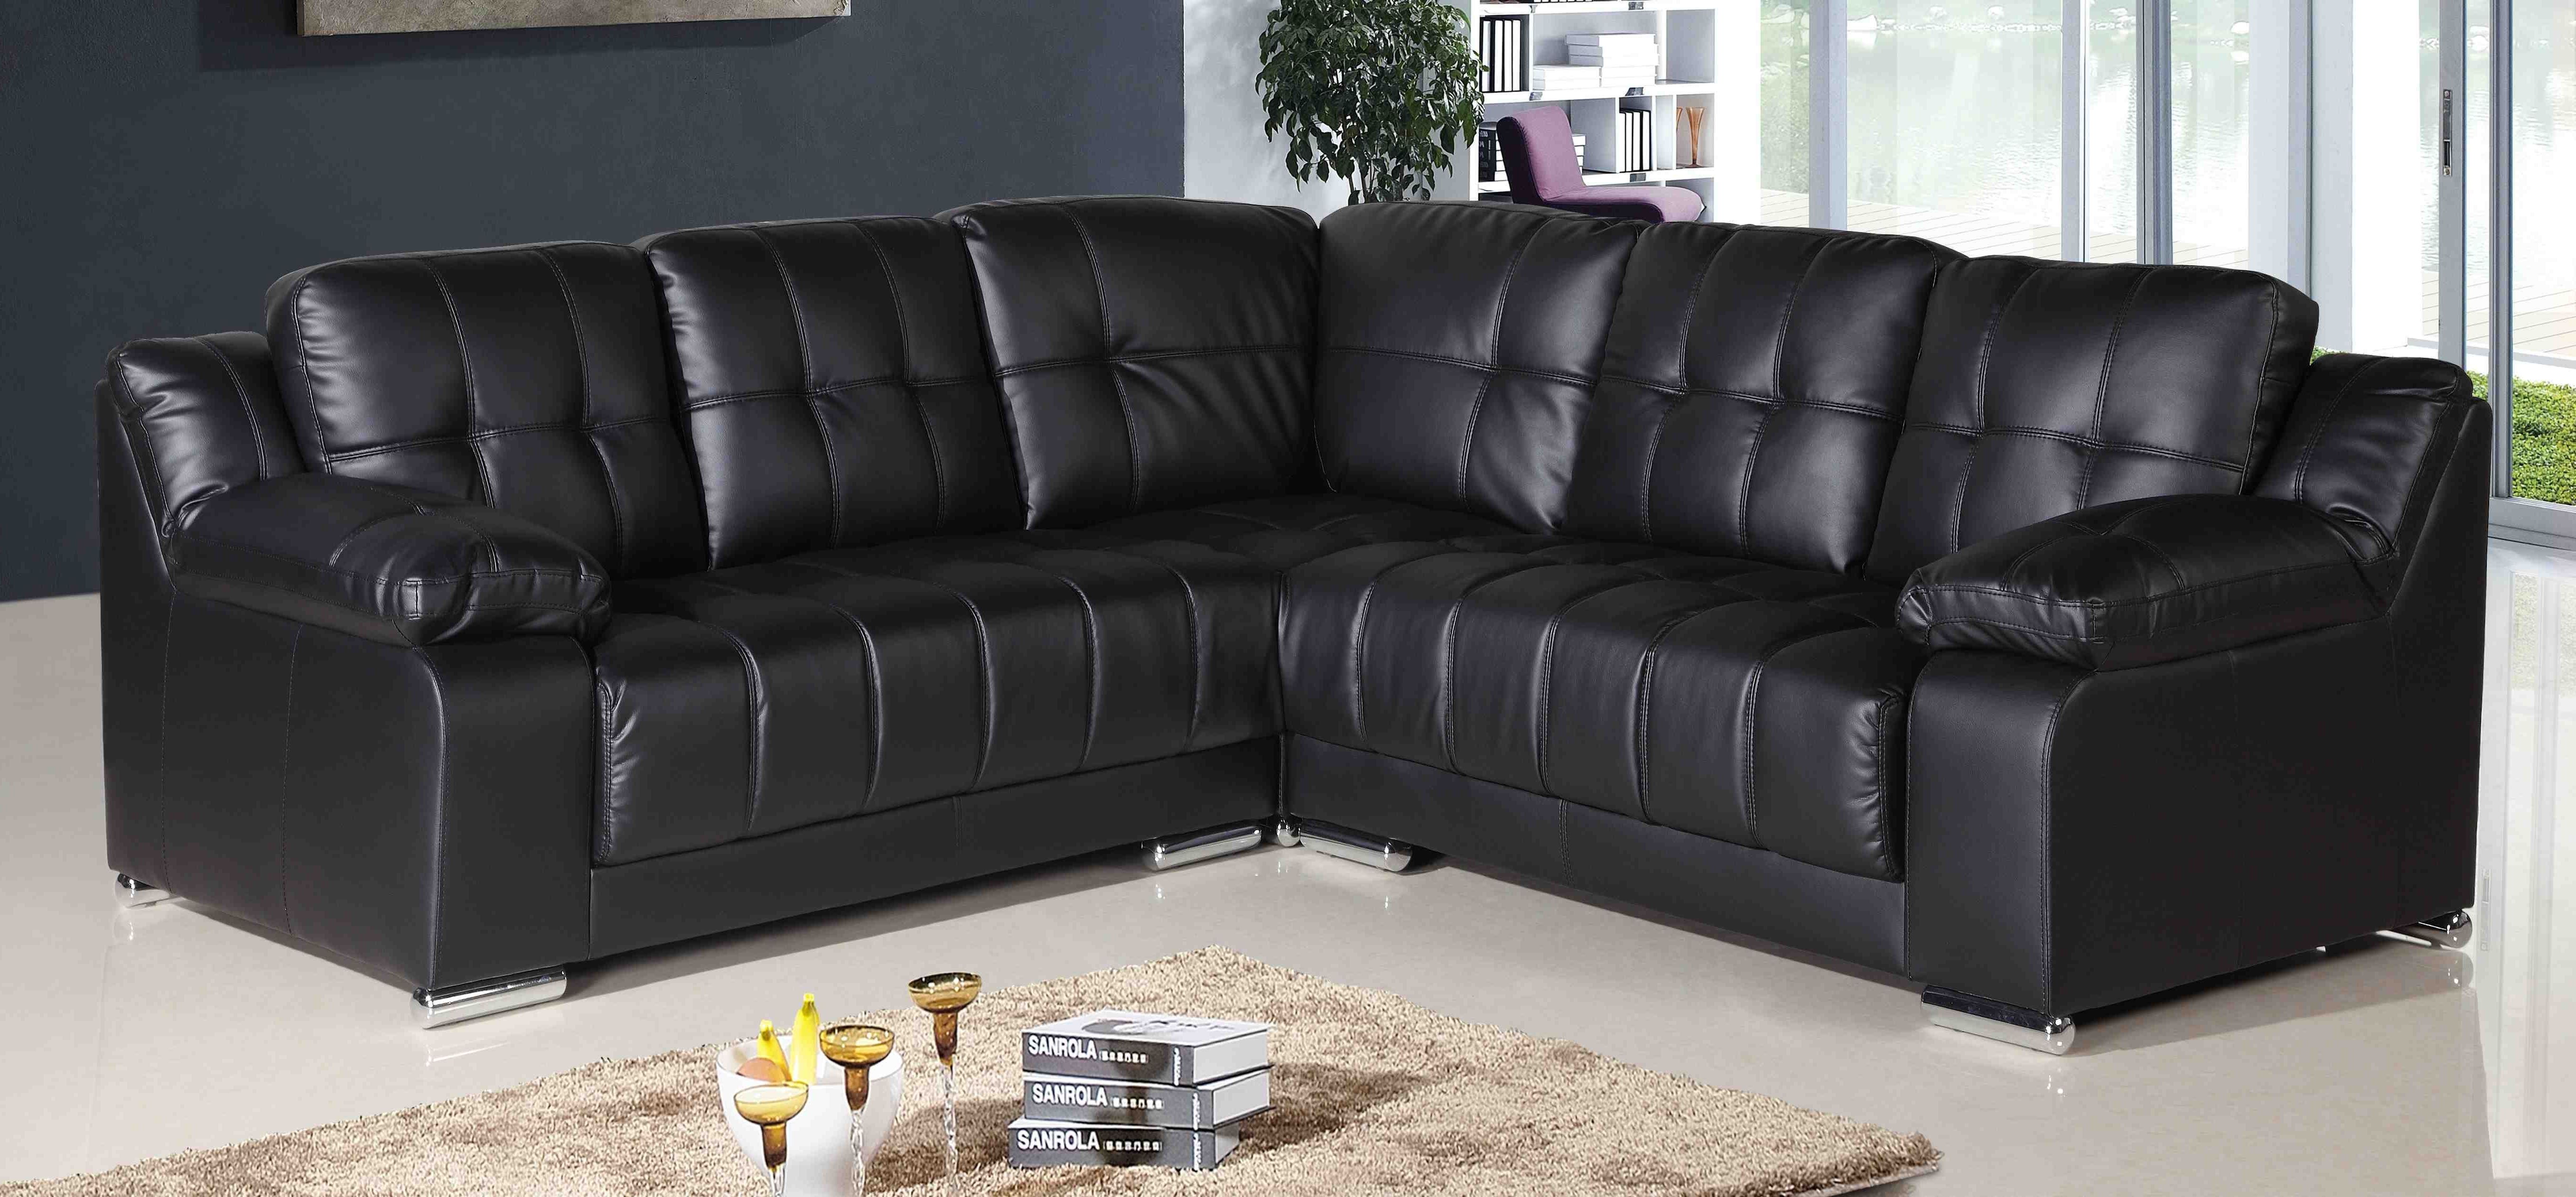 Small Leather Corner Sofas 52 With Small Leather Corner Sofas Throughout Fashionable Leather Corner Sofas (View 3 of 20)